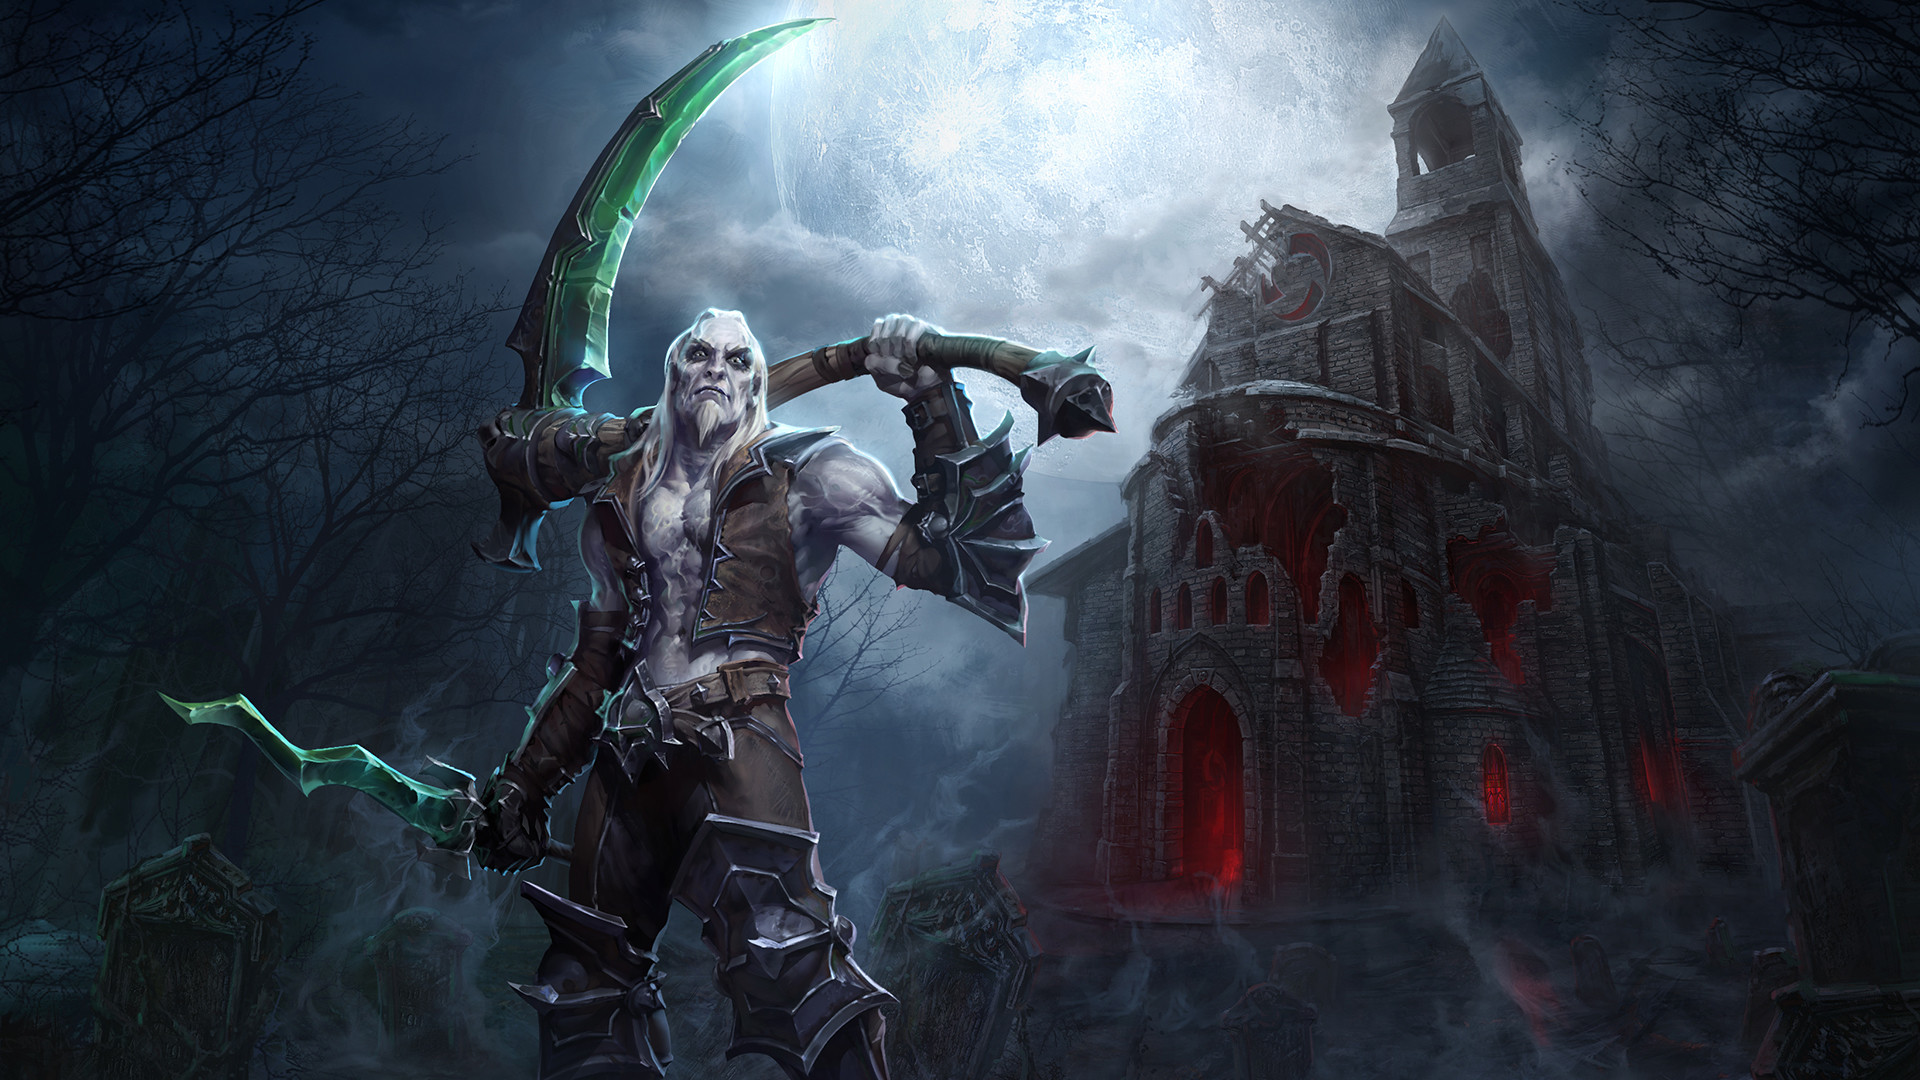 1920x1080 Dustin Browder Confirmed the Necromancer Xul as being a Melee Specialist  that will soon come to Heroes of the Storm (HotS). He also confirmed  Li-Ming, ...